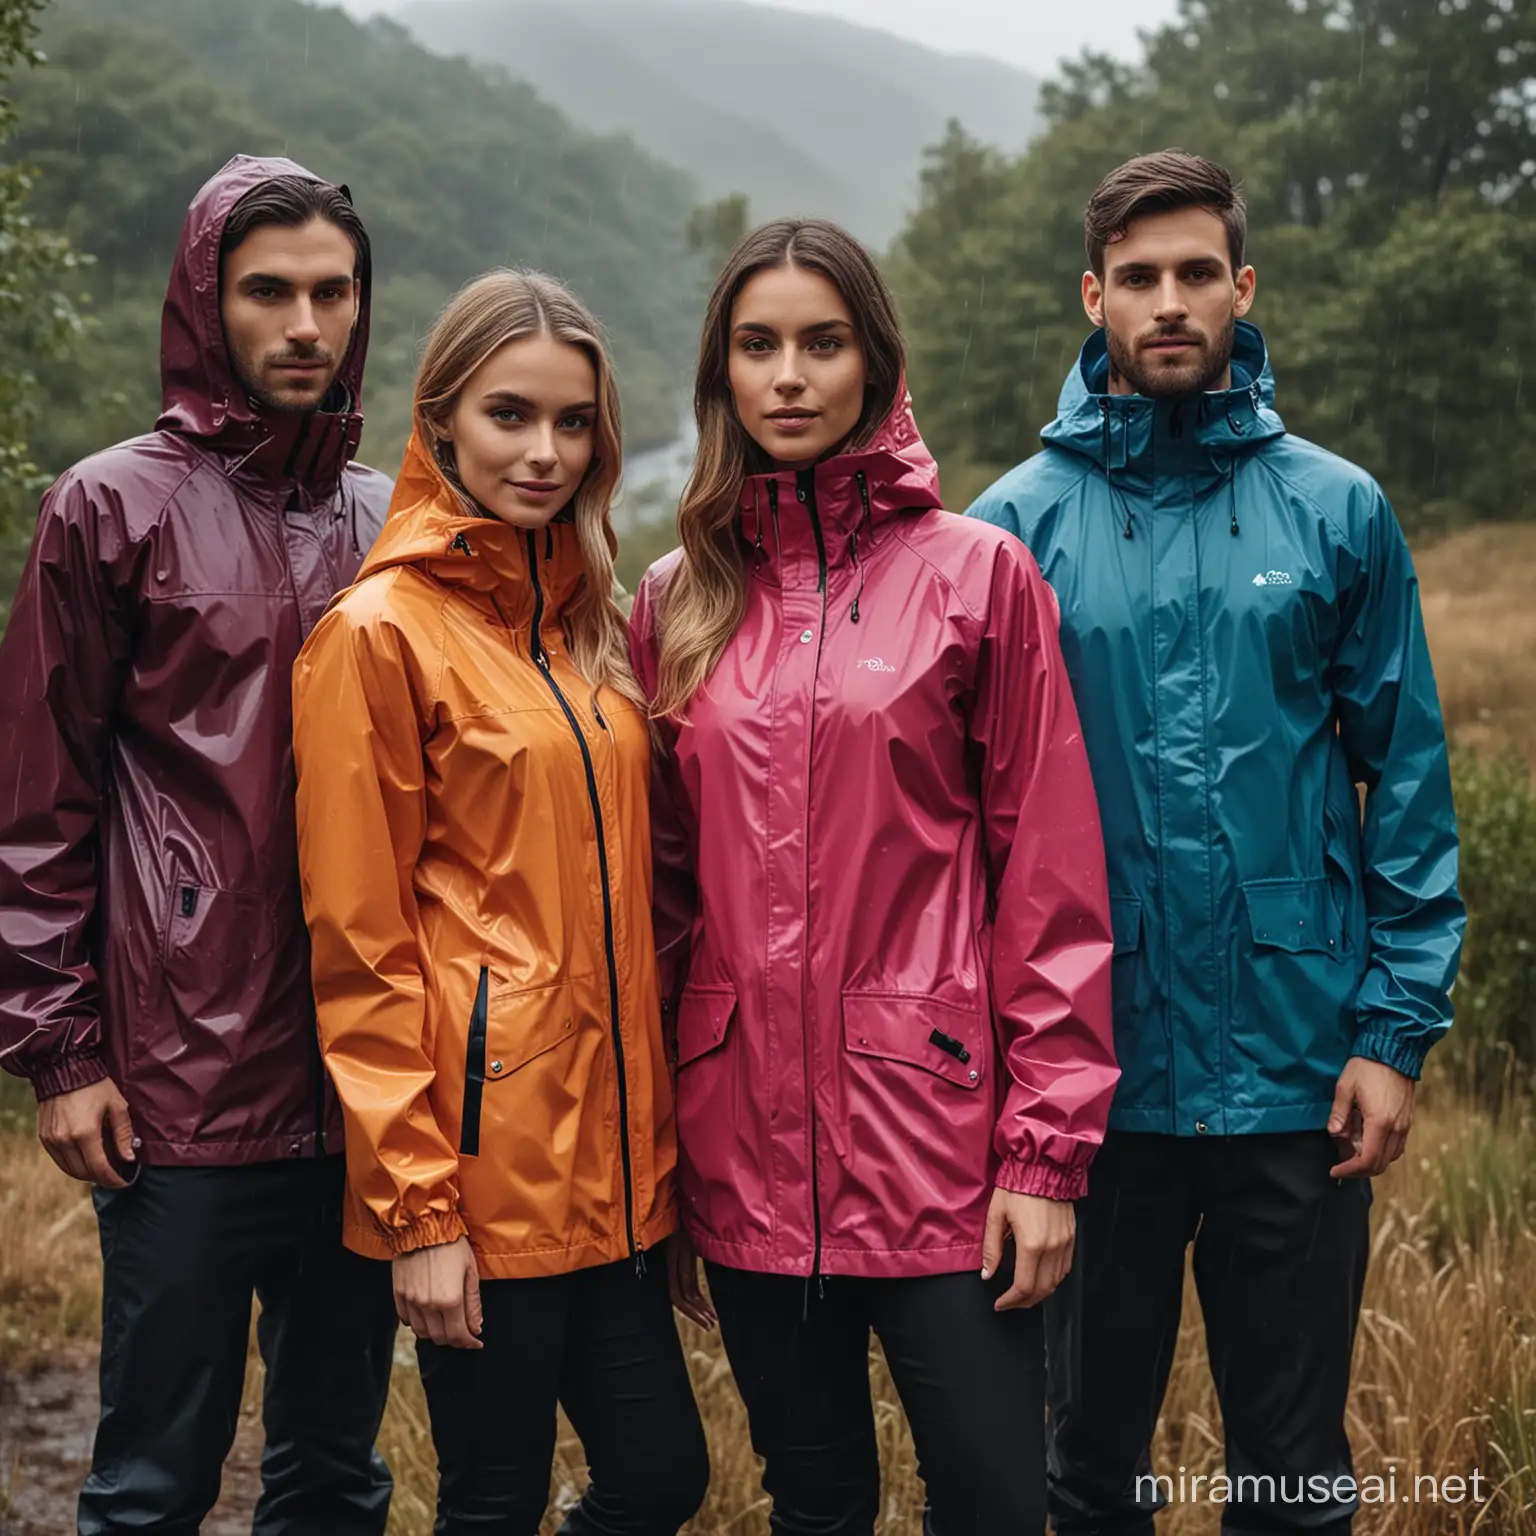 Modern Style Rain Jacket Promotion Photoshoot in Various Colors Outdoors